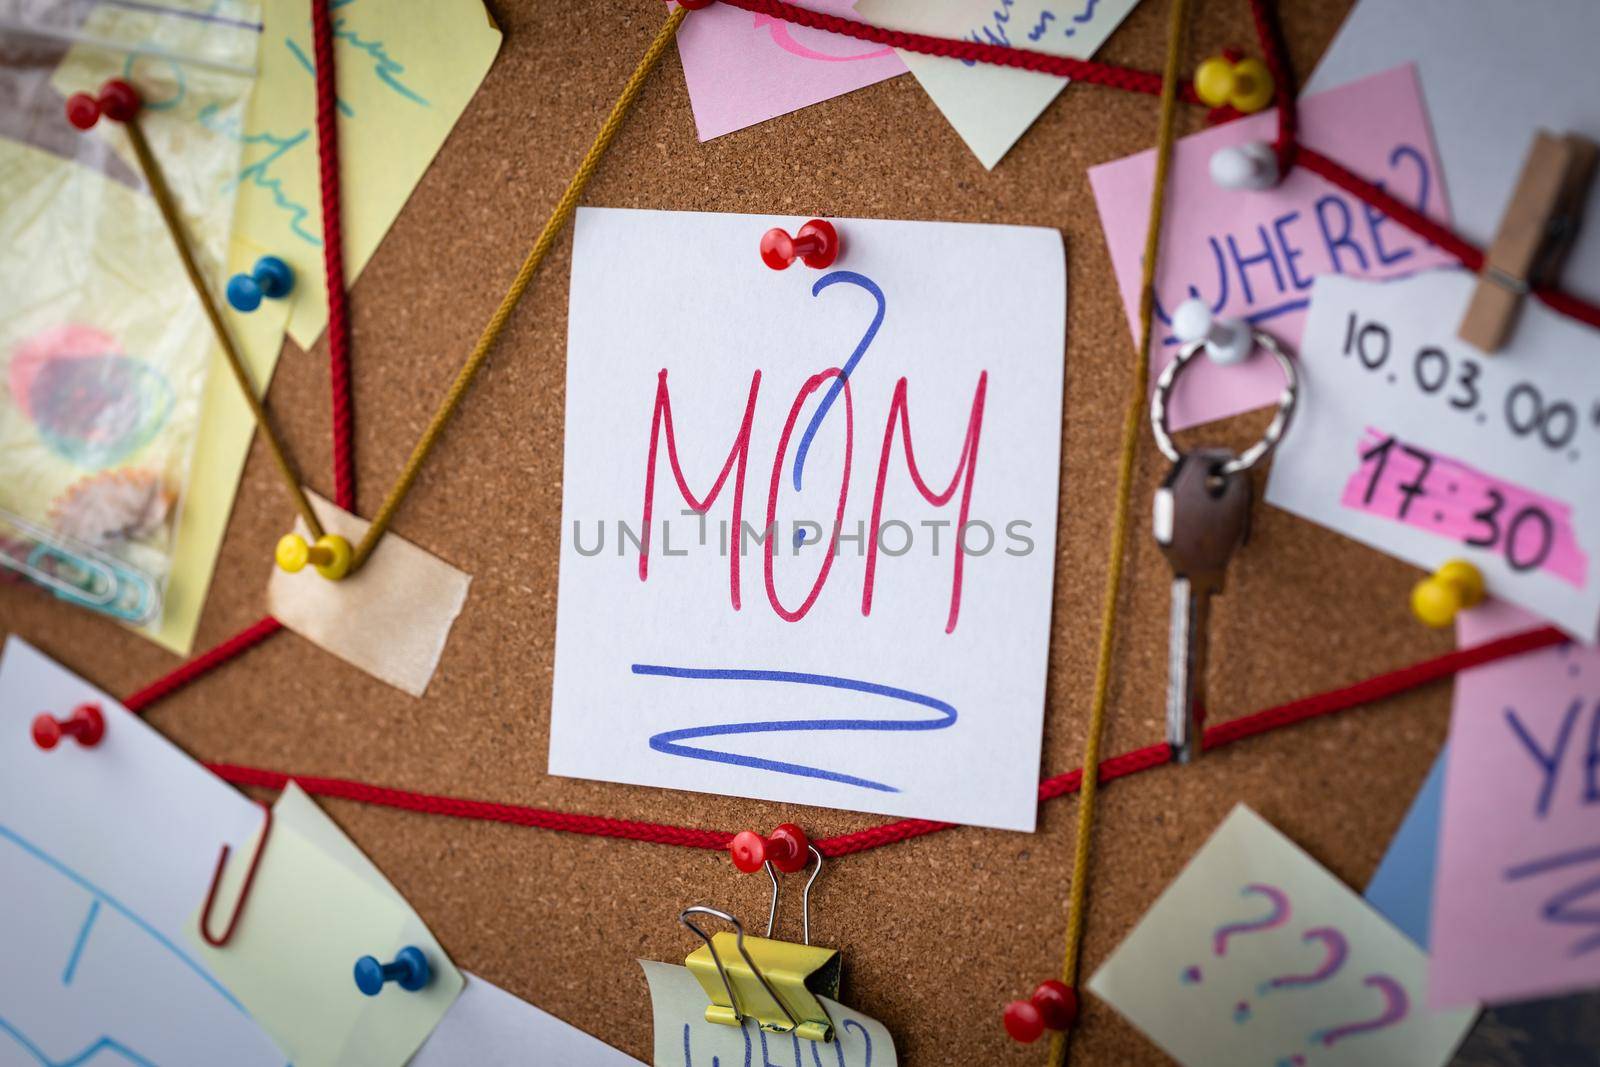 Mom search concept. Close-up view of a detective board with evidence. In the center is a white sheet attached with a red pin with the text Mom by lunarts